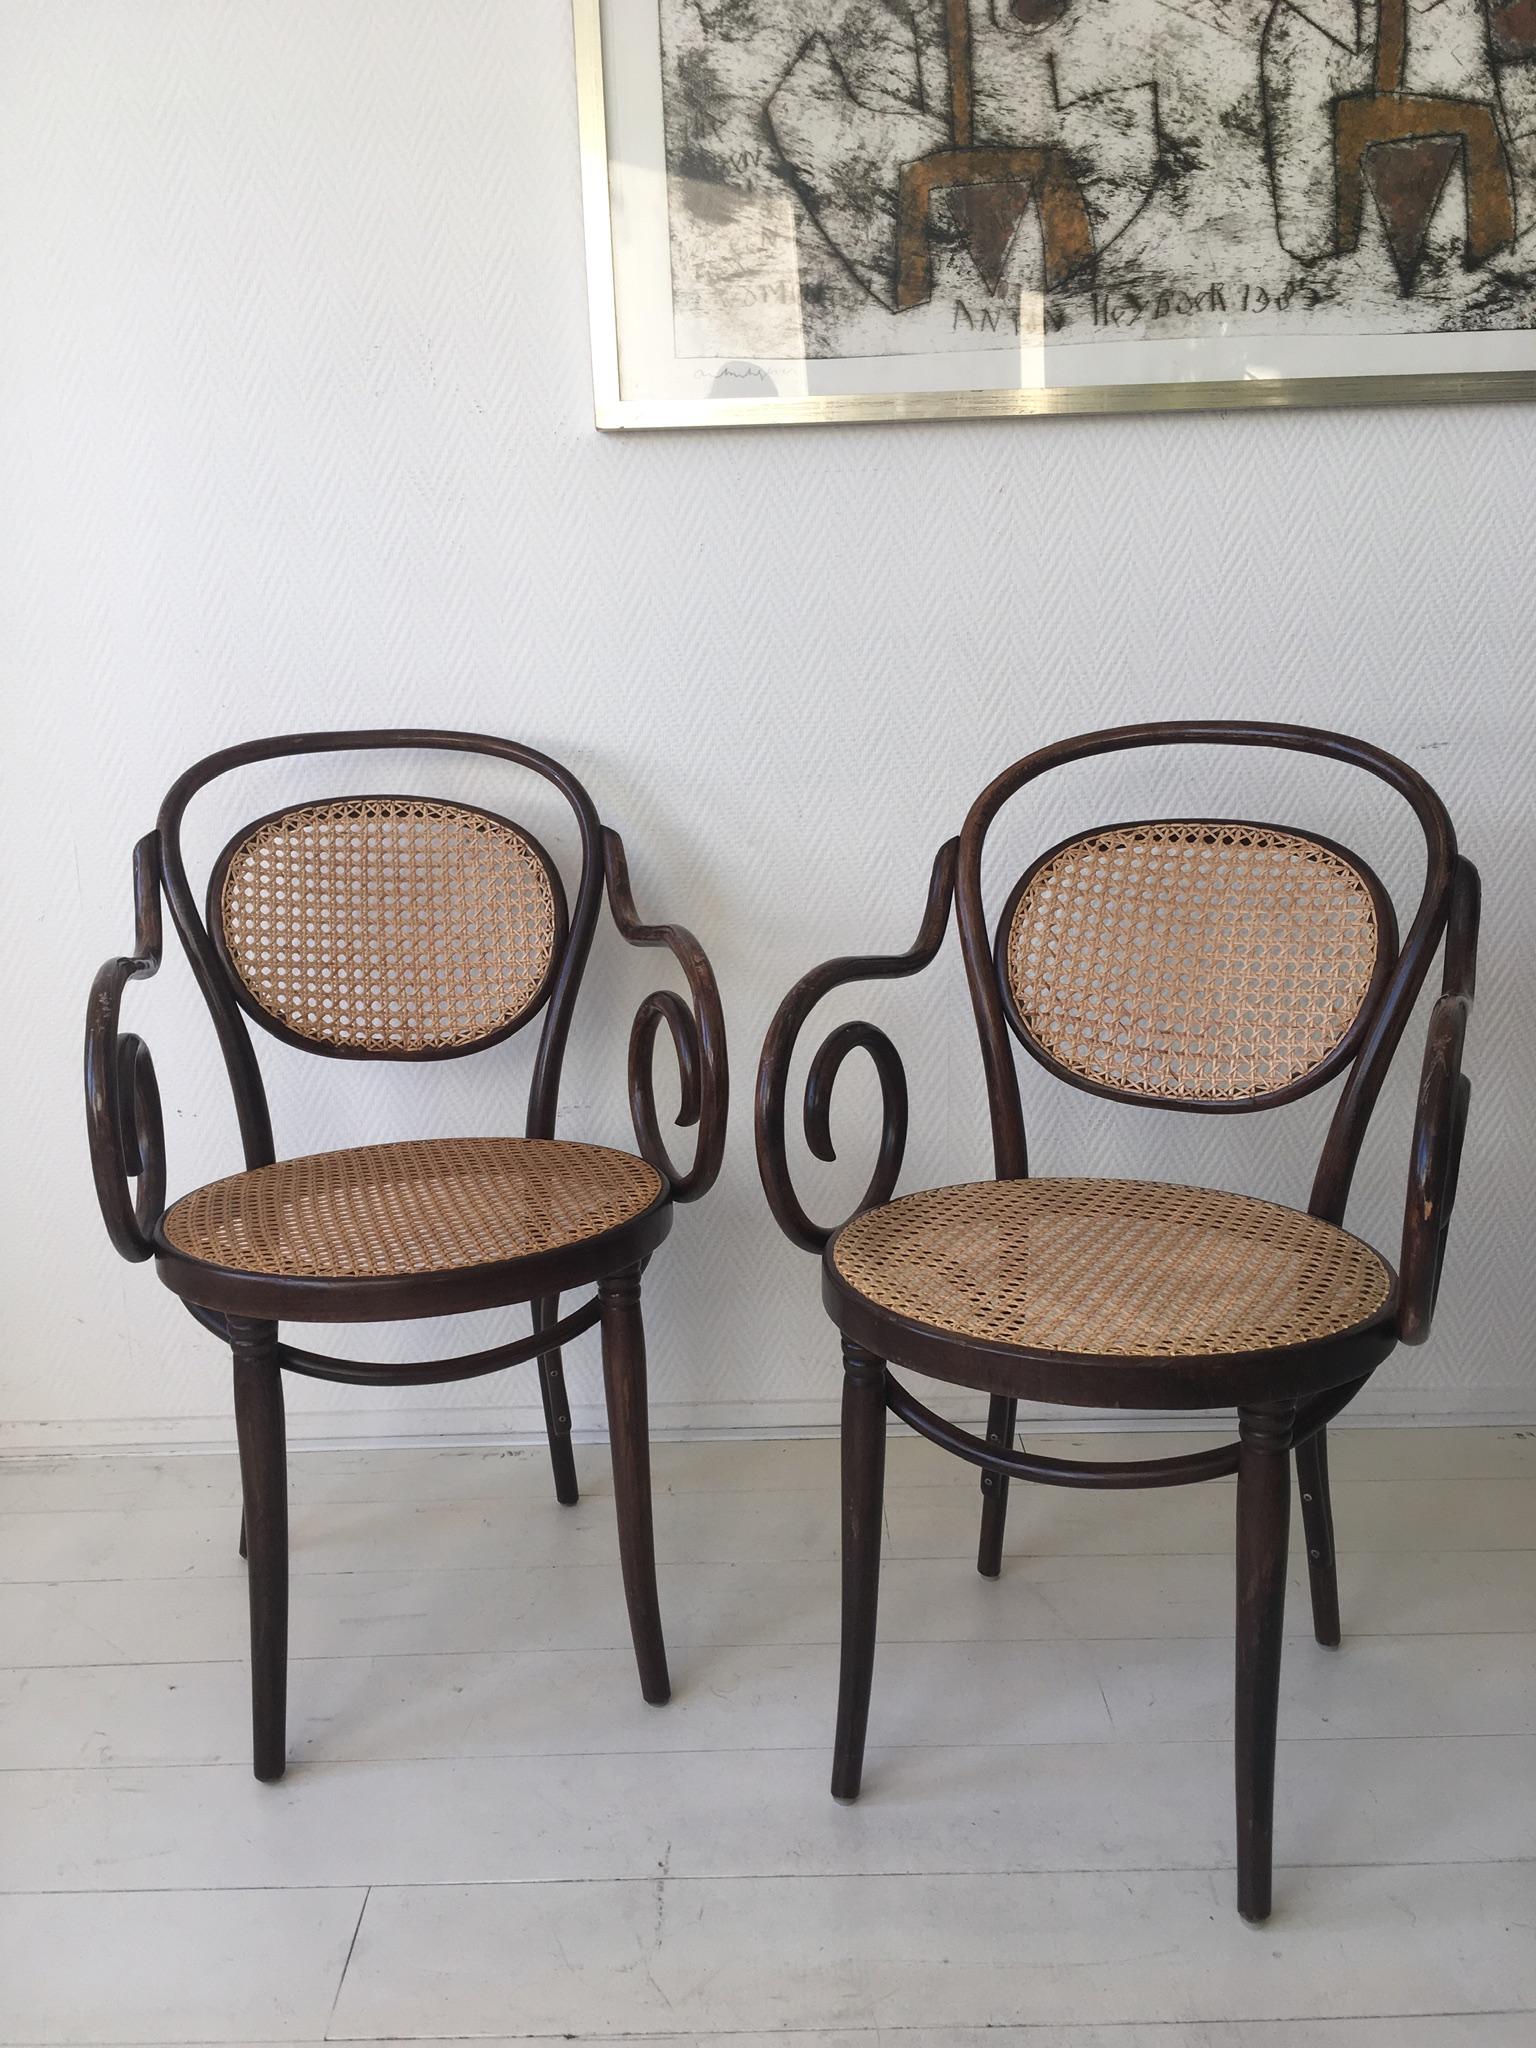 ZPM Radomsko, Former Thonet, No. 11 Bentwood and Rattan Dining Room Chairs 3